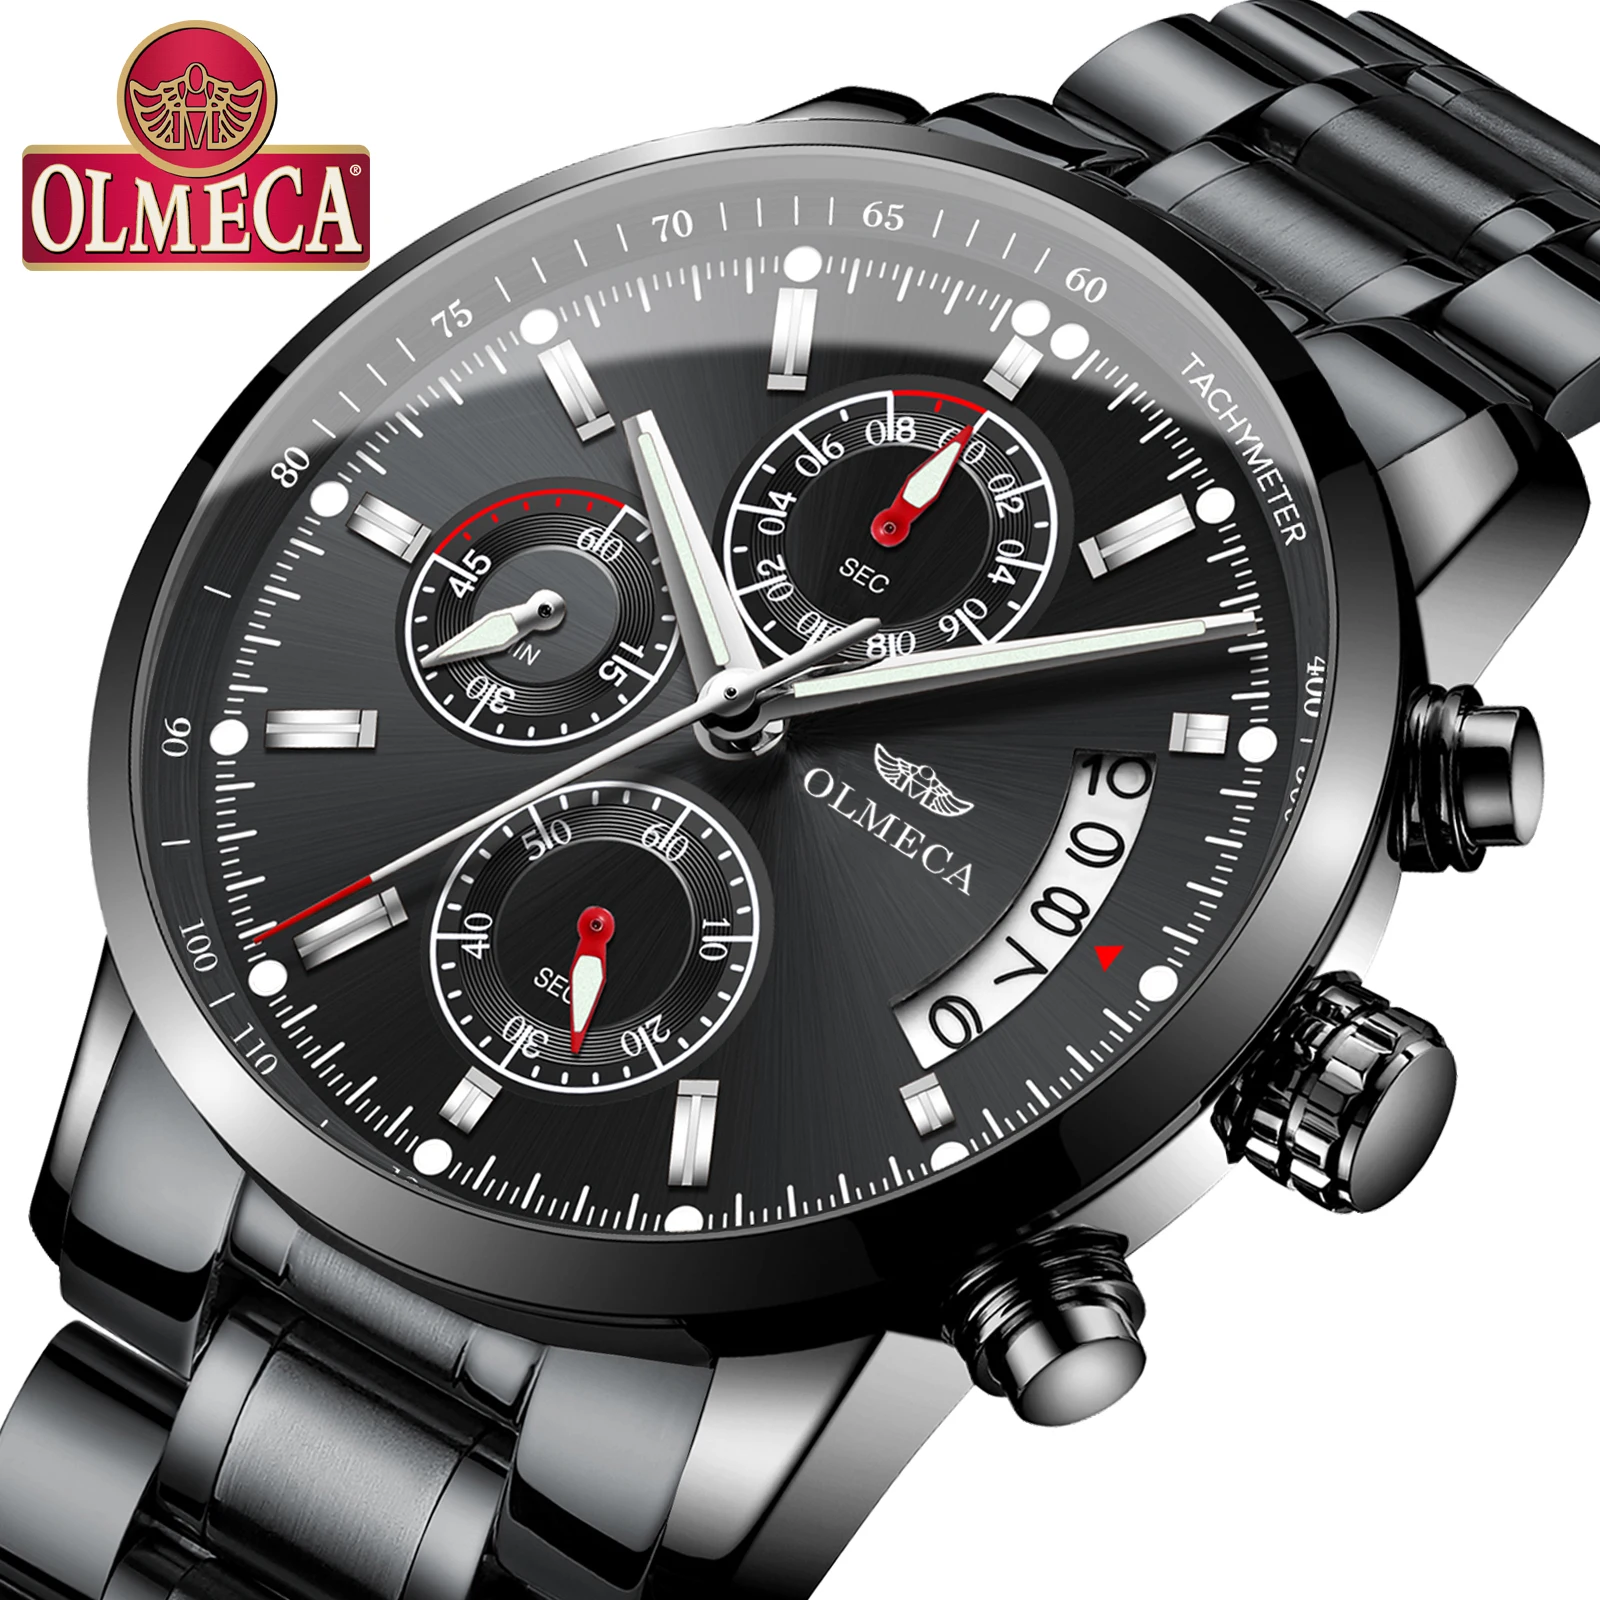 

OLMECA Casual Clock Waterproof Watches Sport Watches For Men Chronograph Wrist Watch Fashion Relogio Masculino Stainless Steel